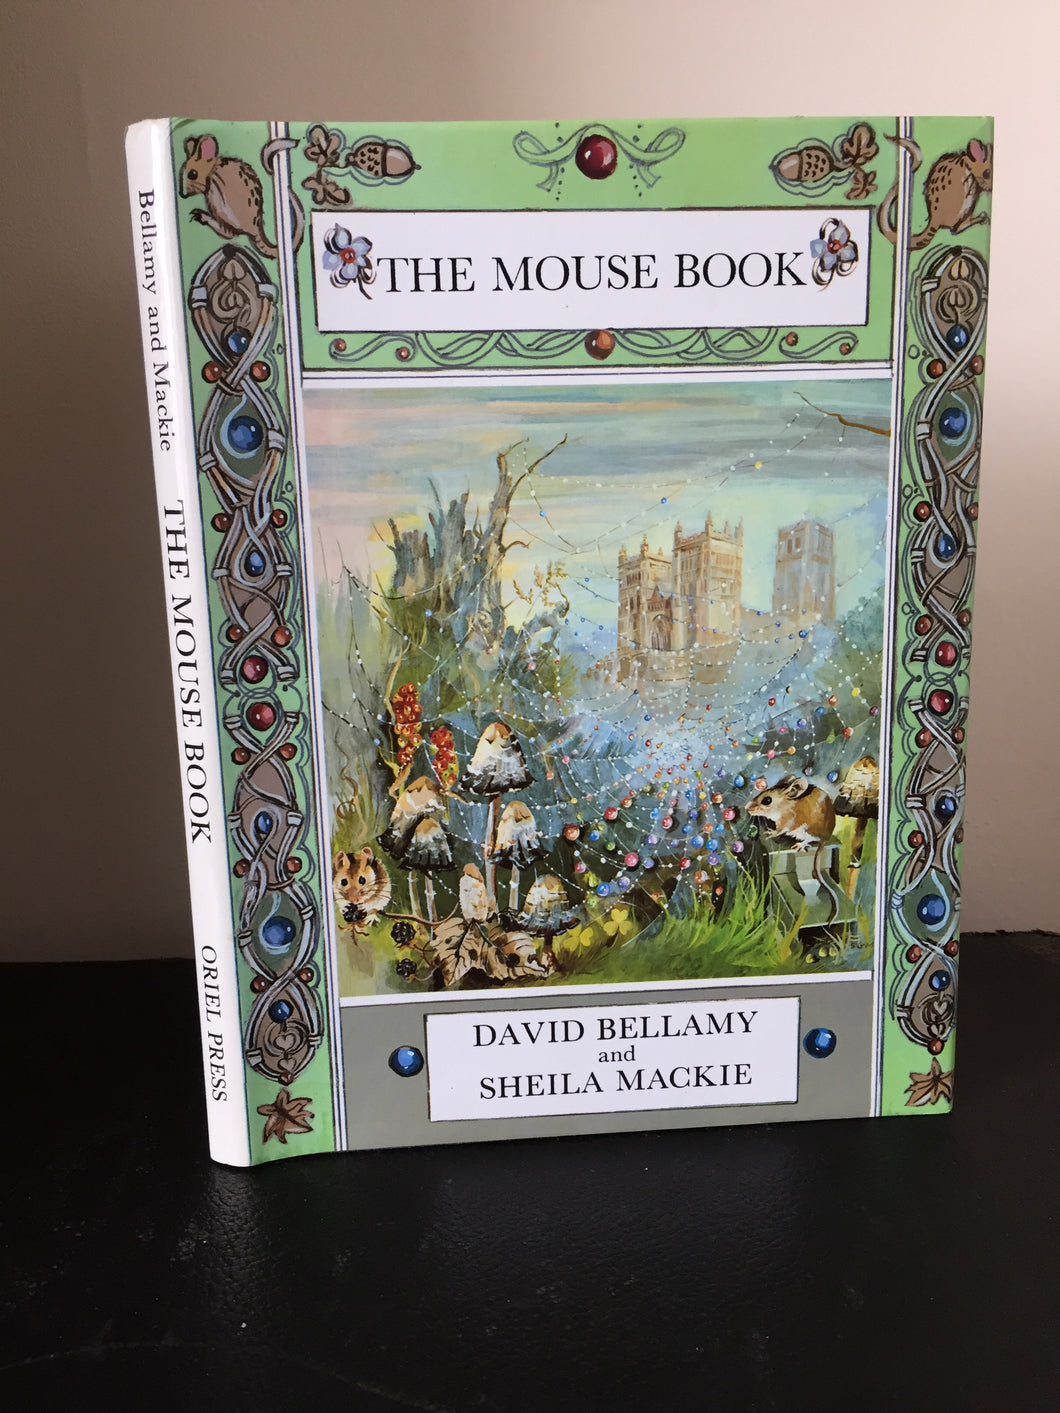 The Mouse Book